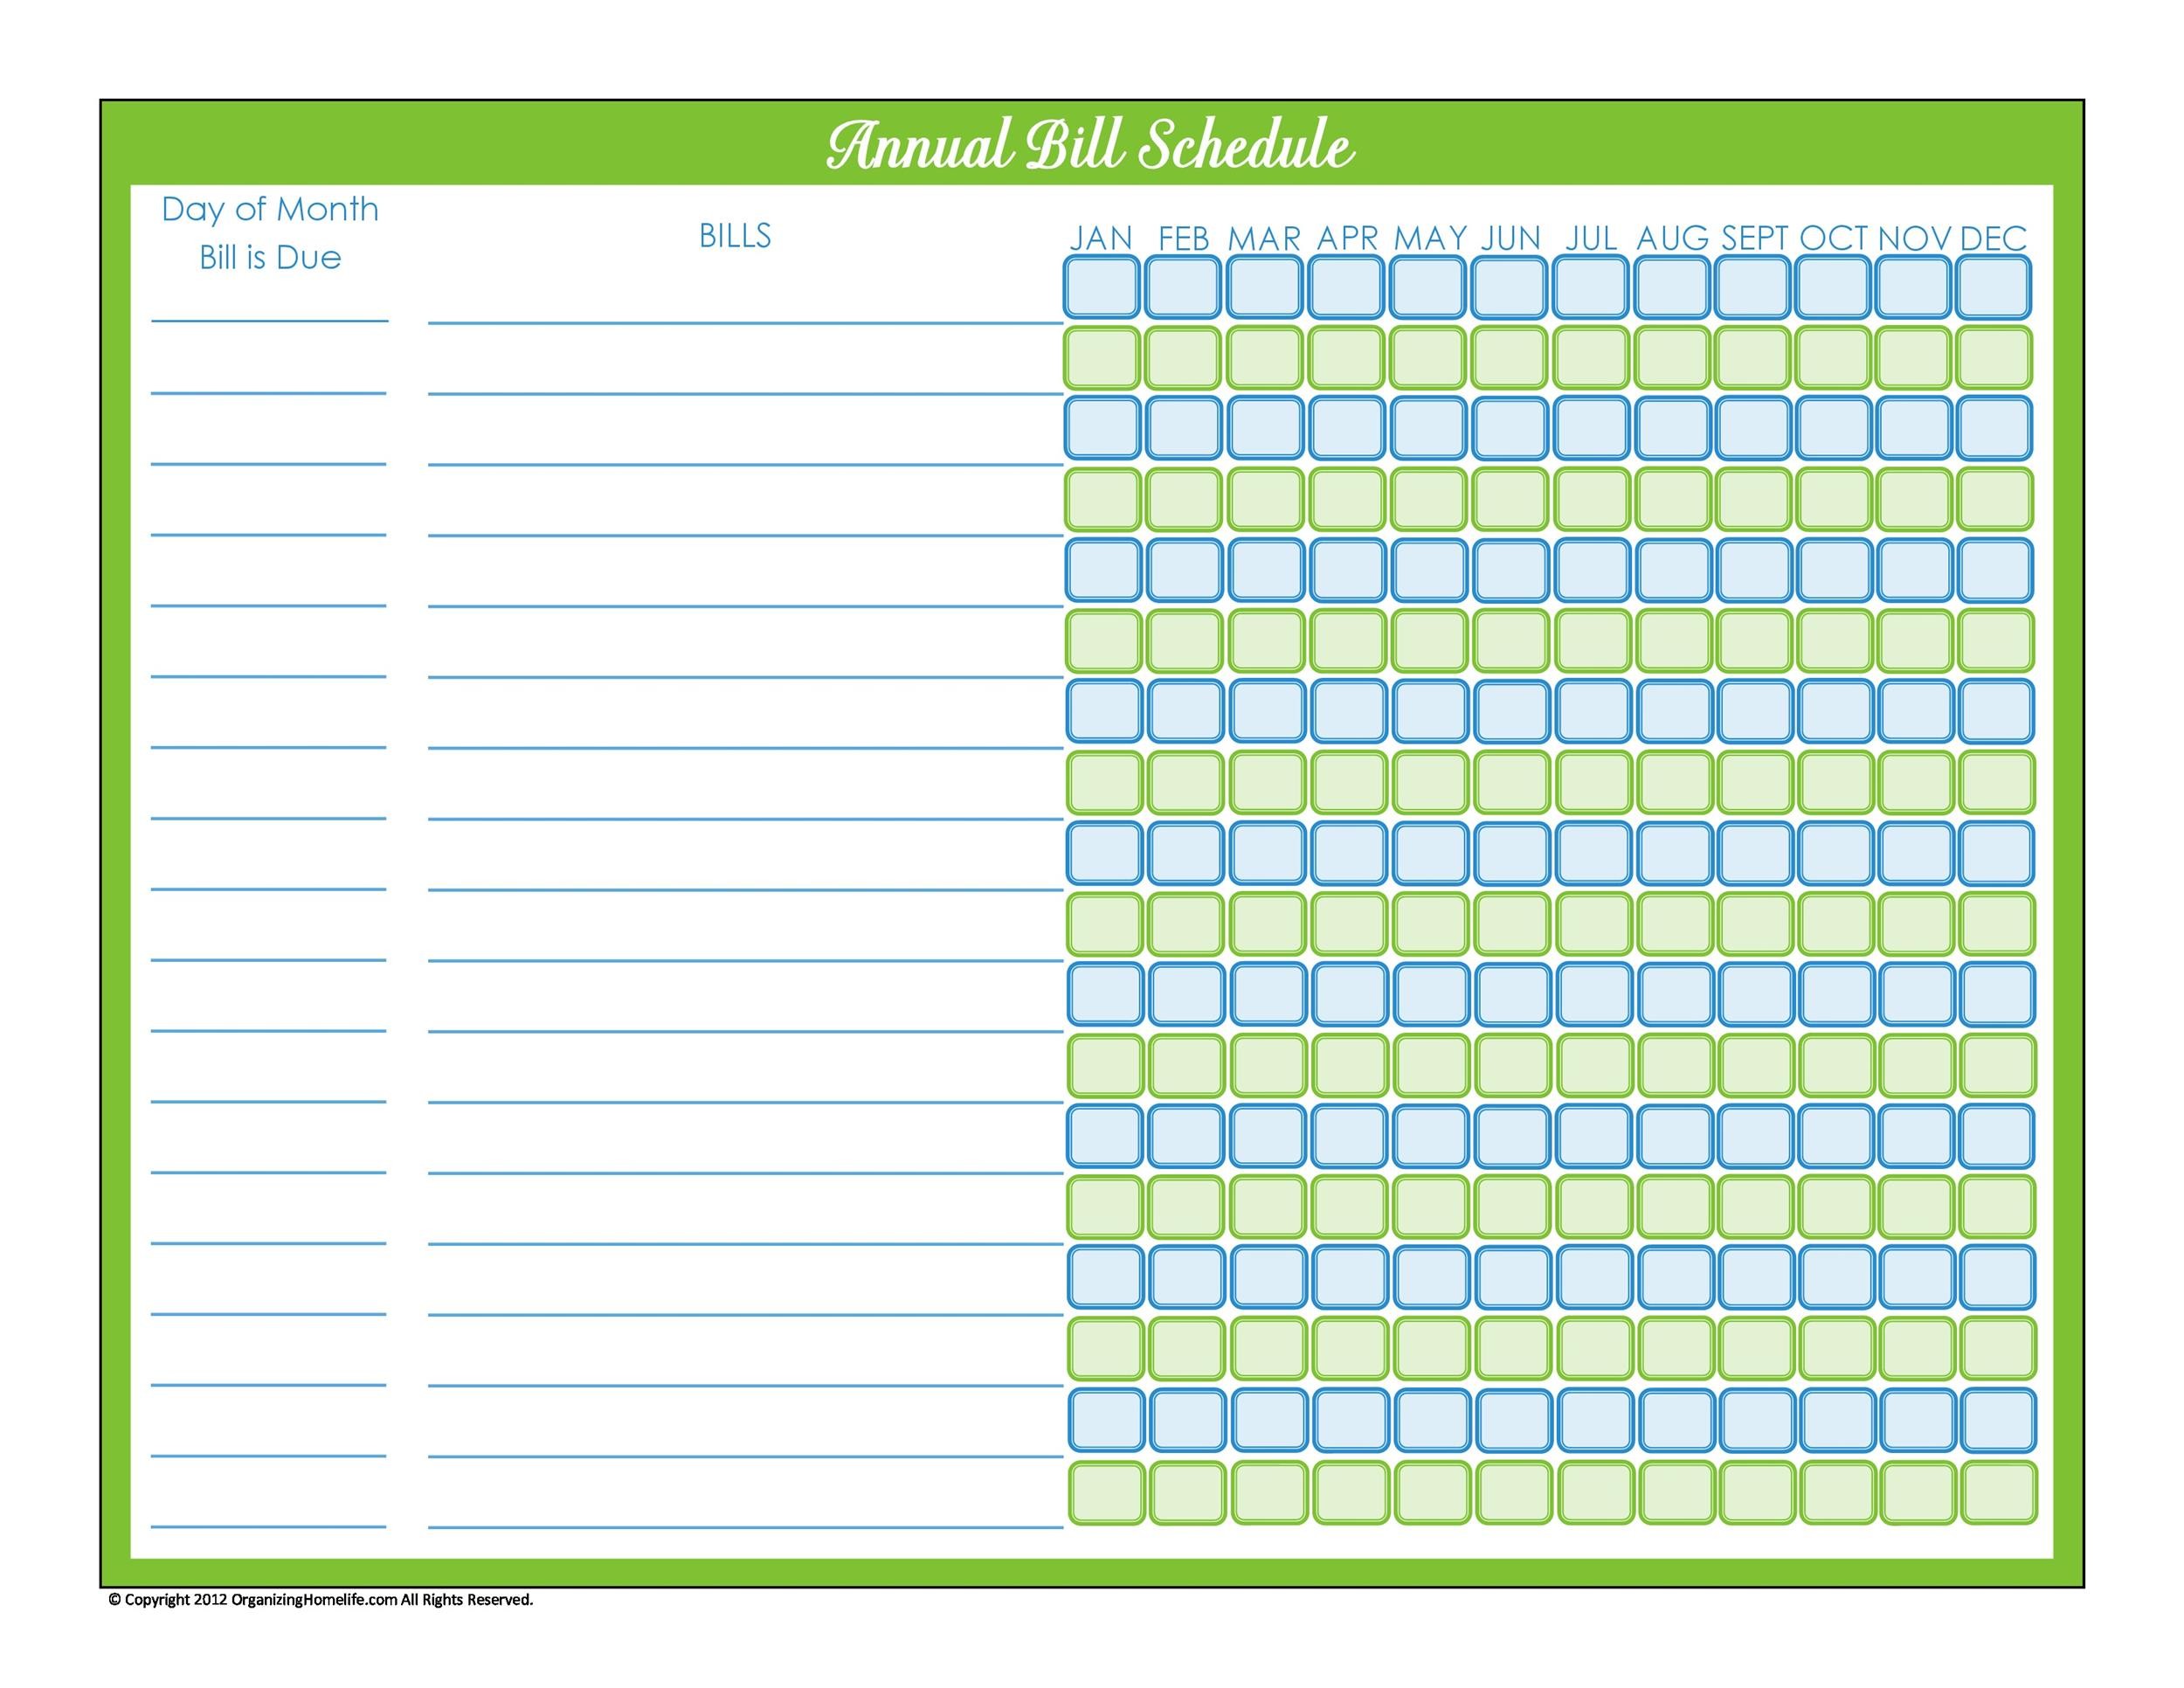 Bill Payment Checklist Printable That are Universal ...